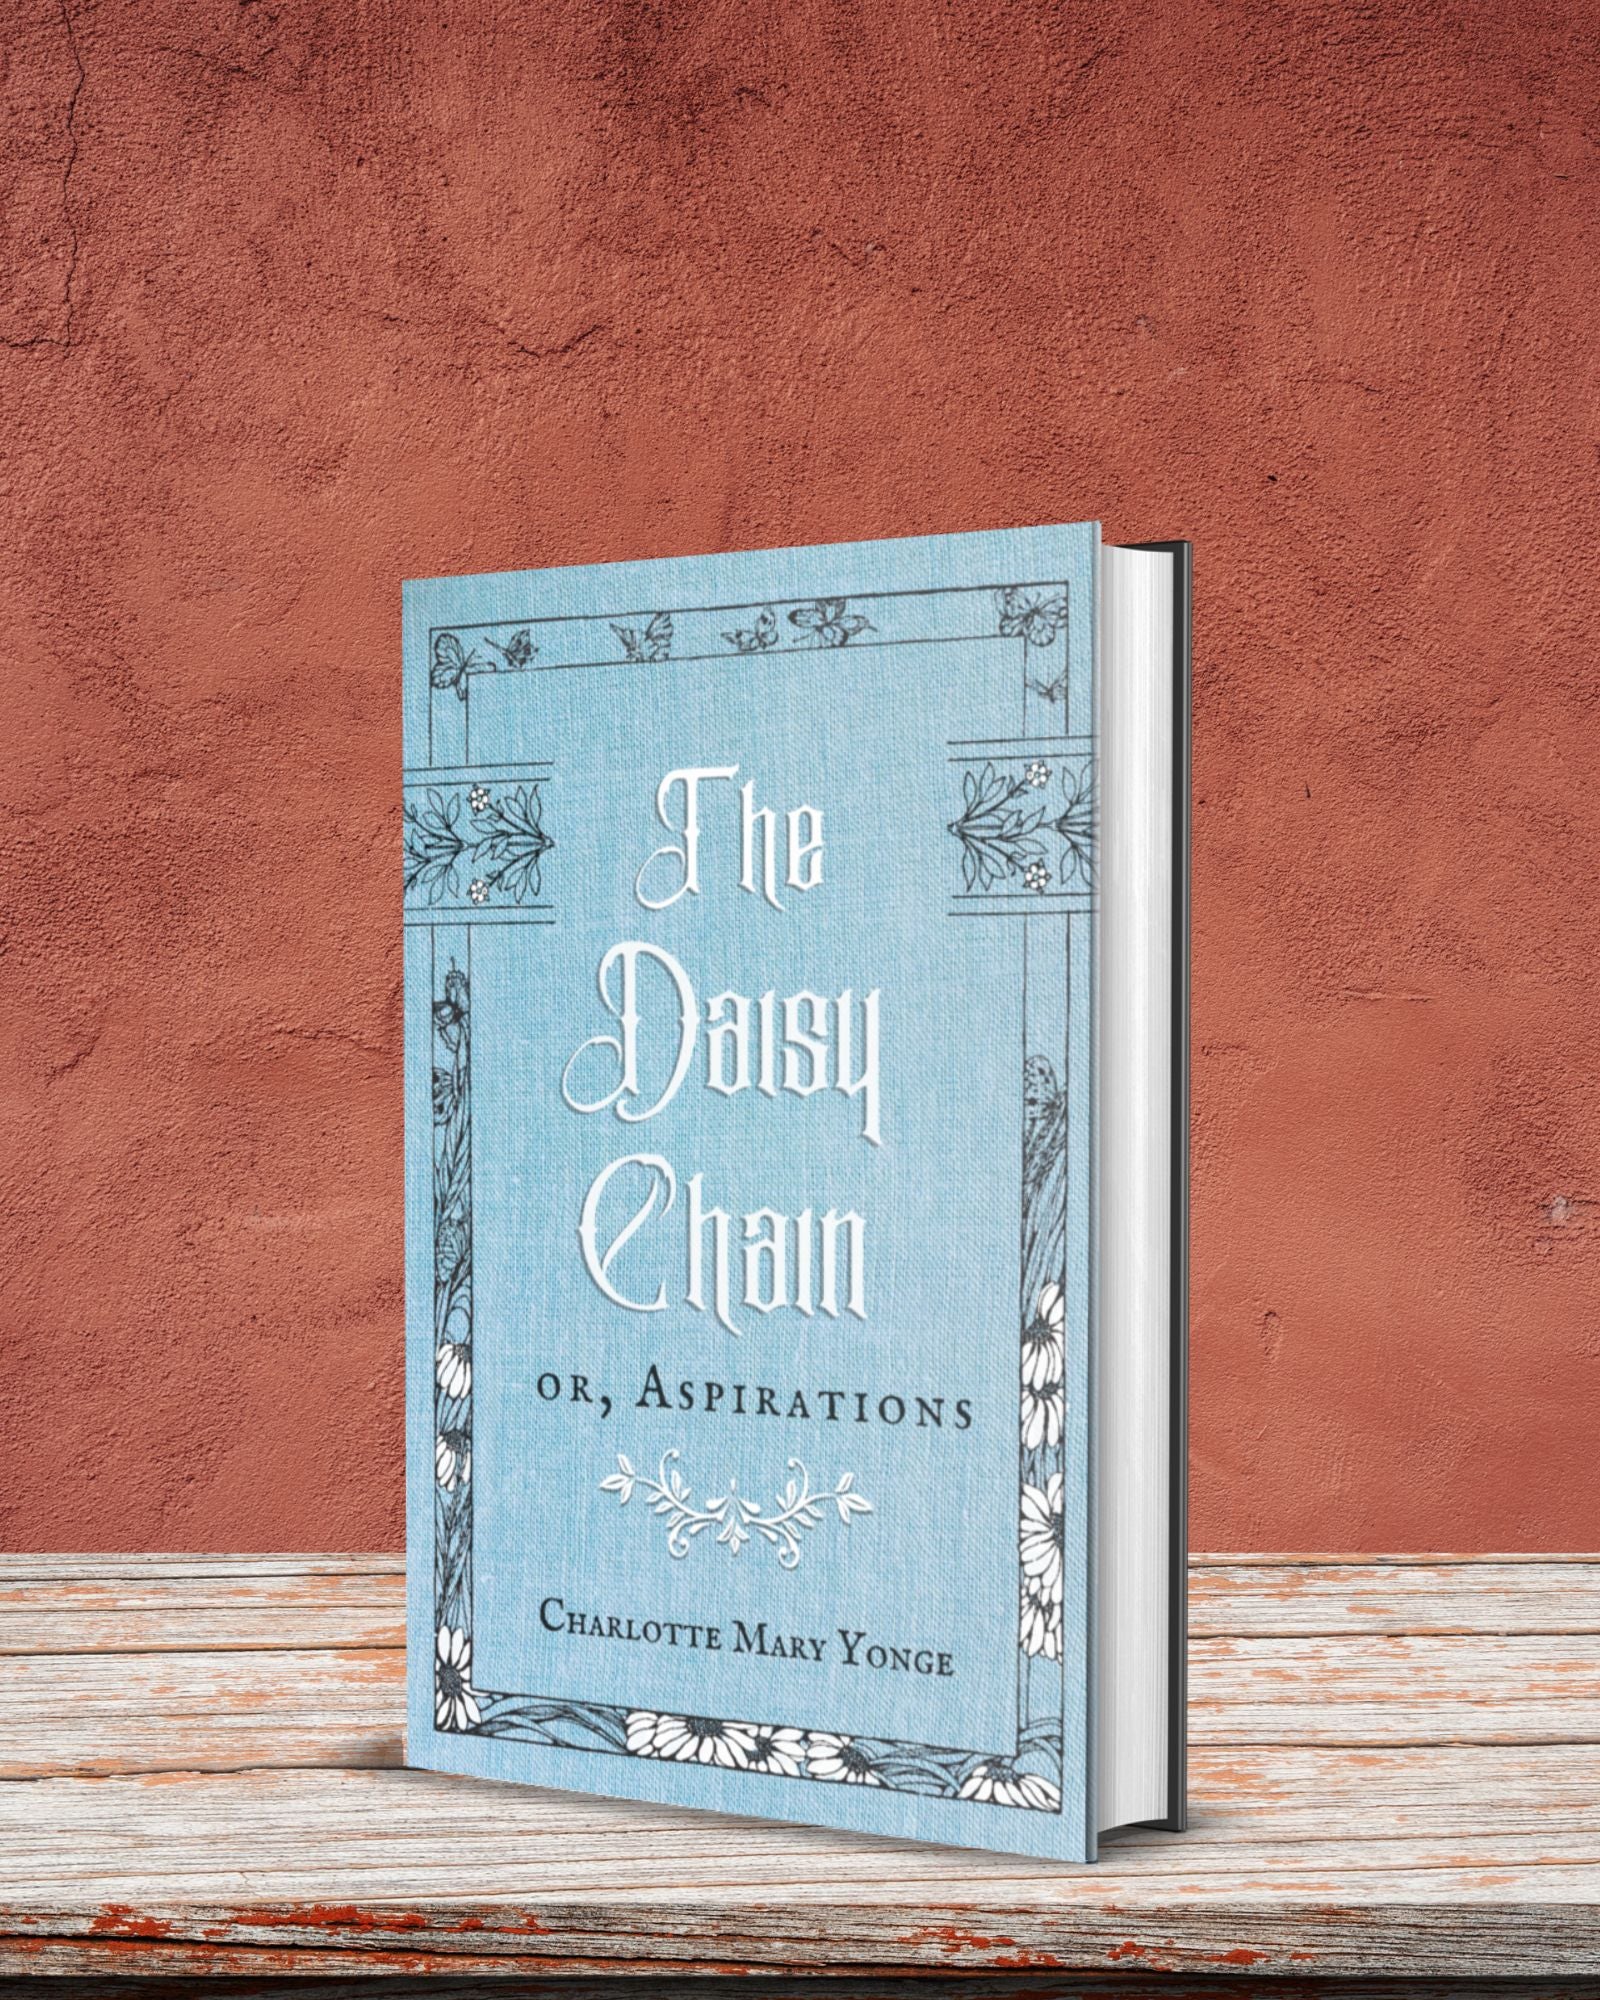 Hardback edition of the lovely pale blue and white book "The Daisy Chain or, Aspirations" stands on a rustic table in front of a clay colored wall.